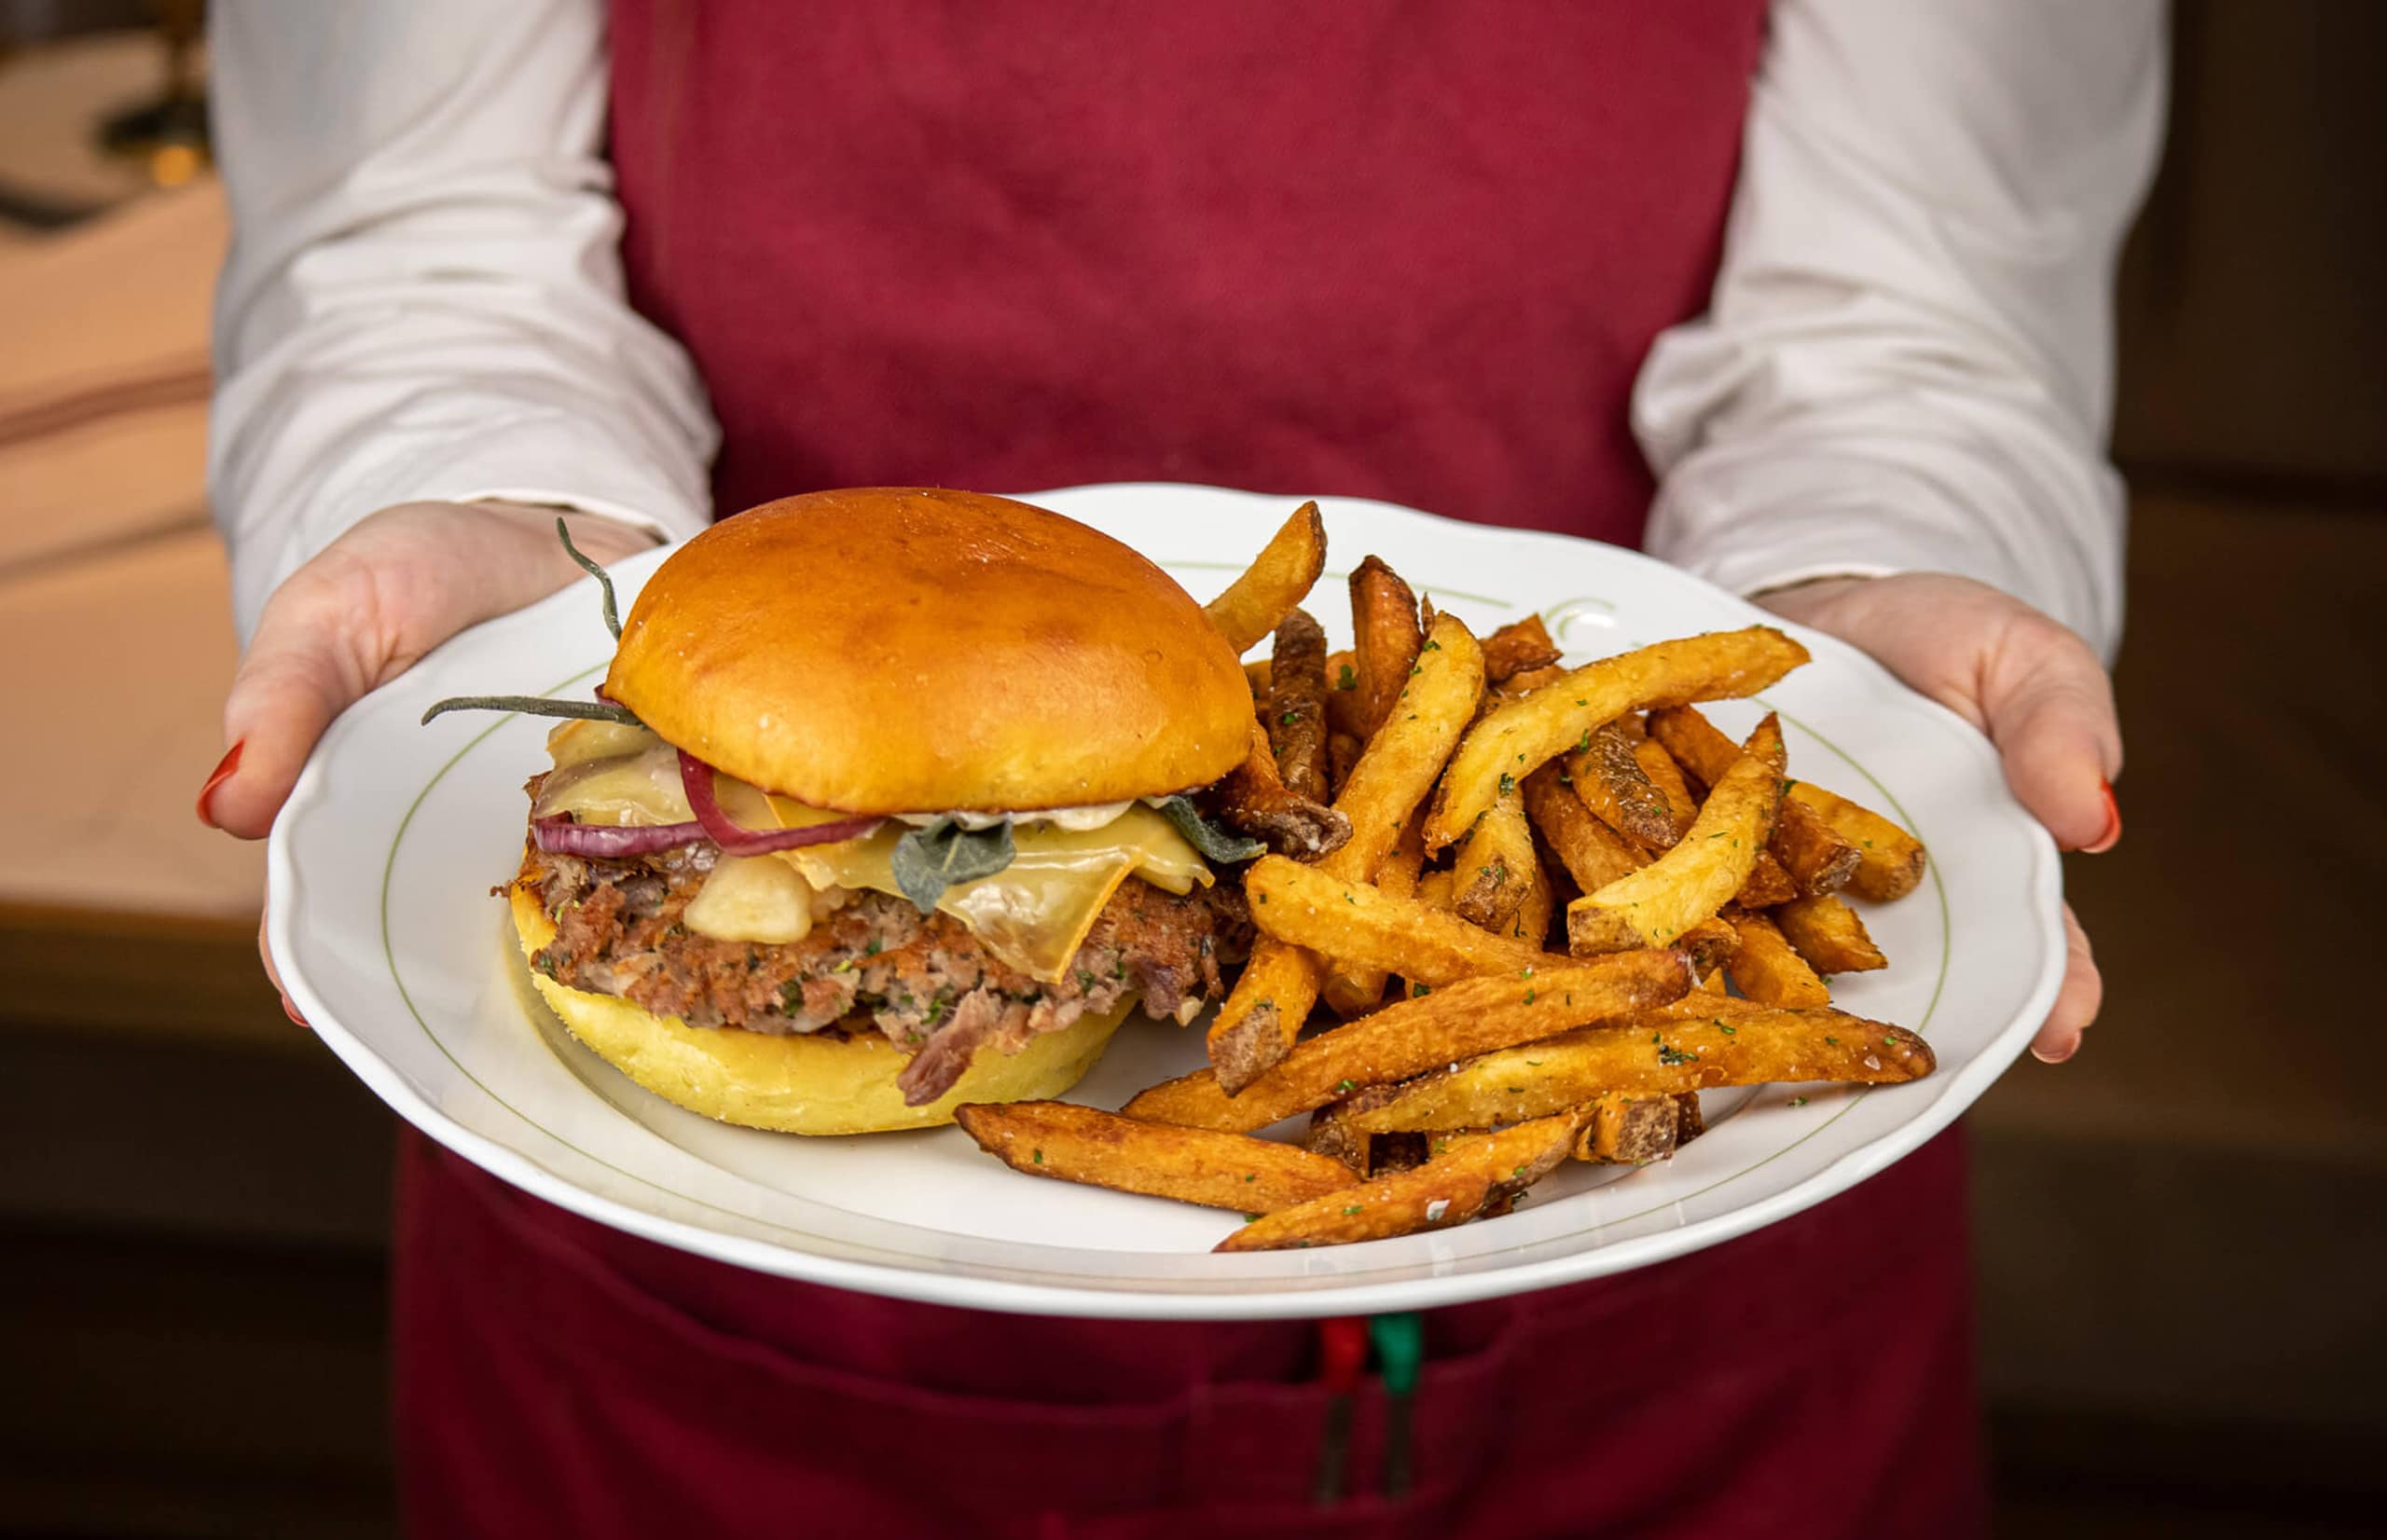 Server holding Cafe Lunette's Burger Bash burger on a white plate with fries